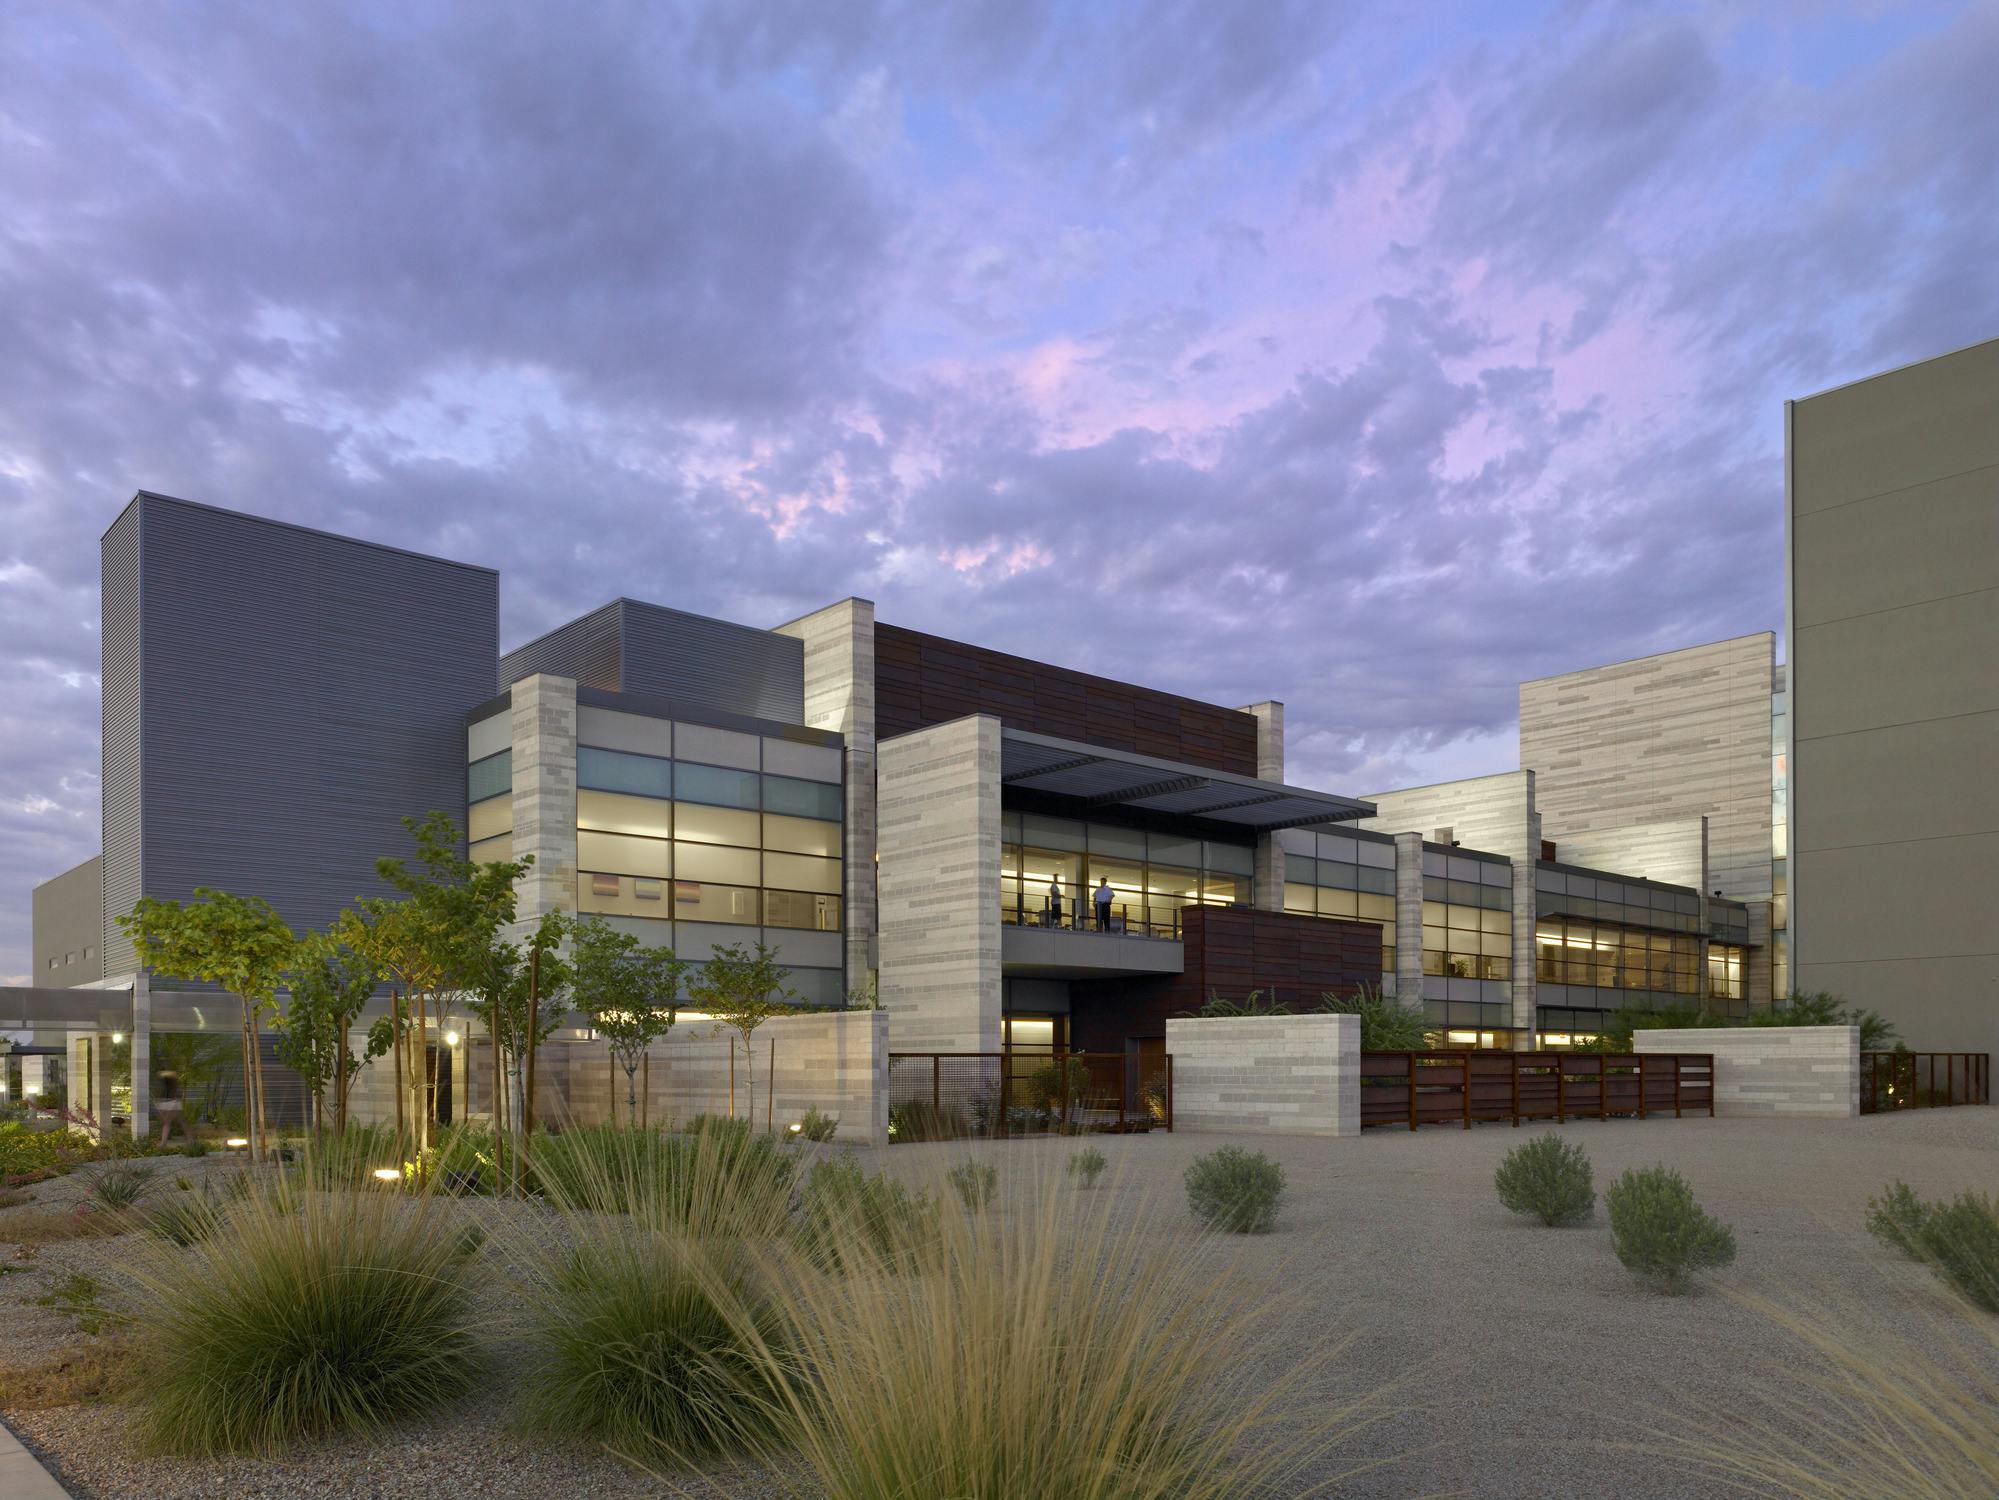 The hospital is designed to provide the community with a place to heal, while respecting its desert environs and drawing inspiration from its natural beauty.